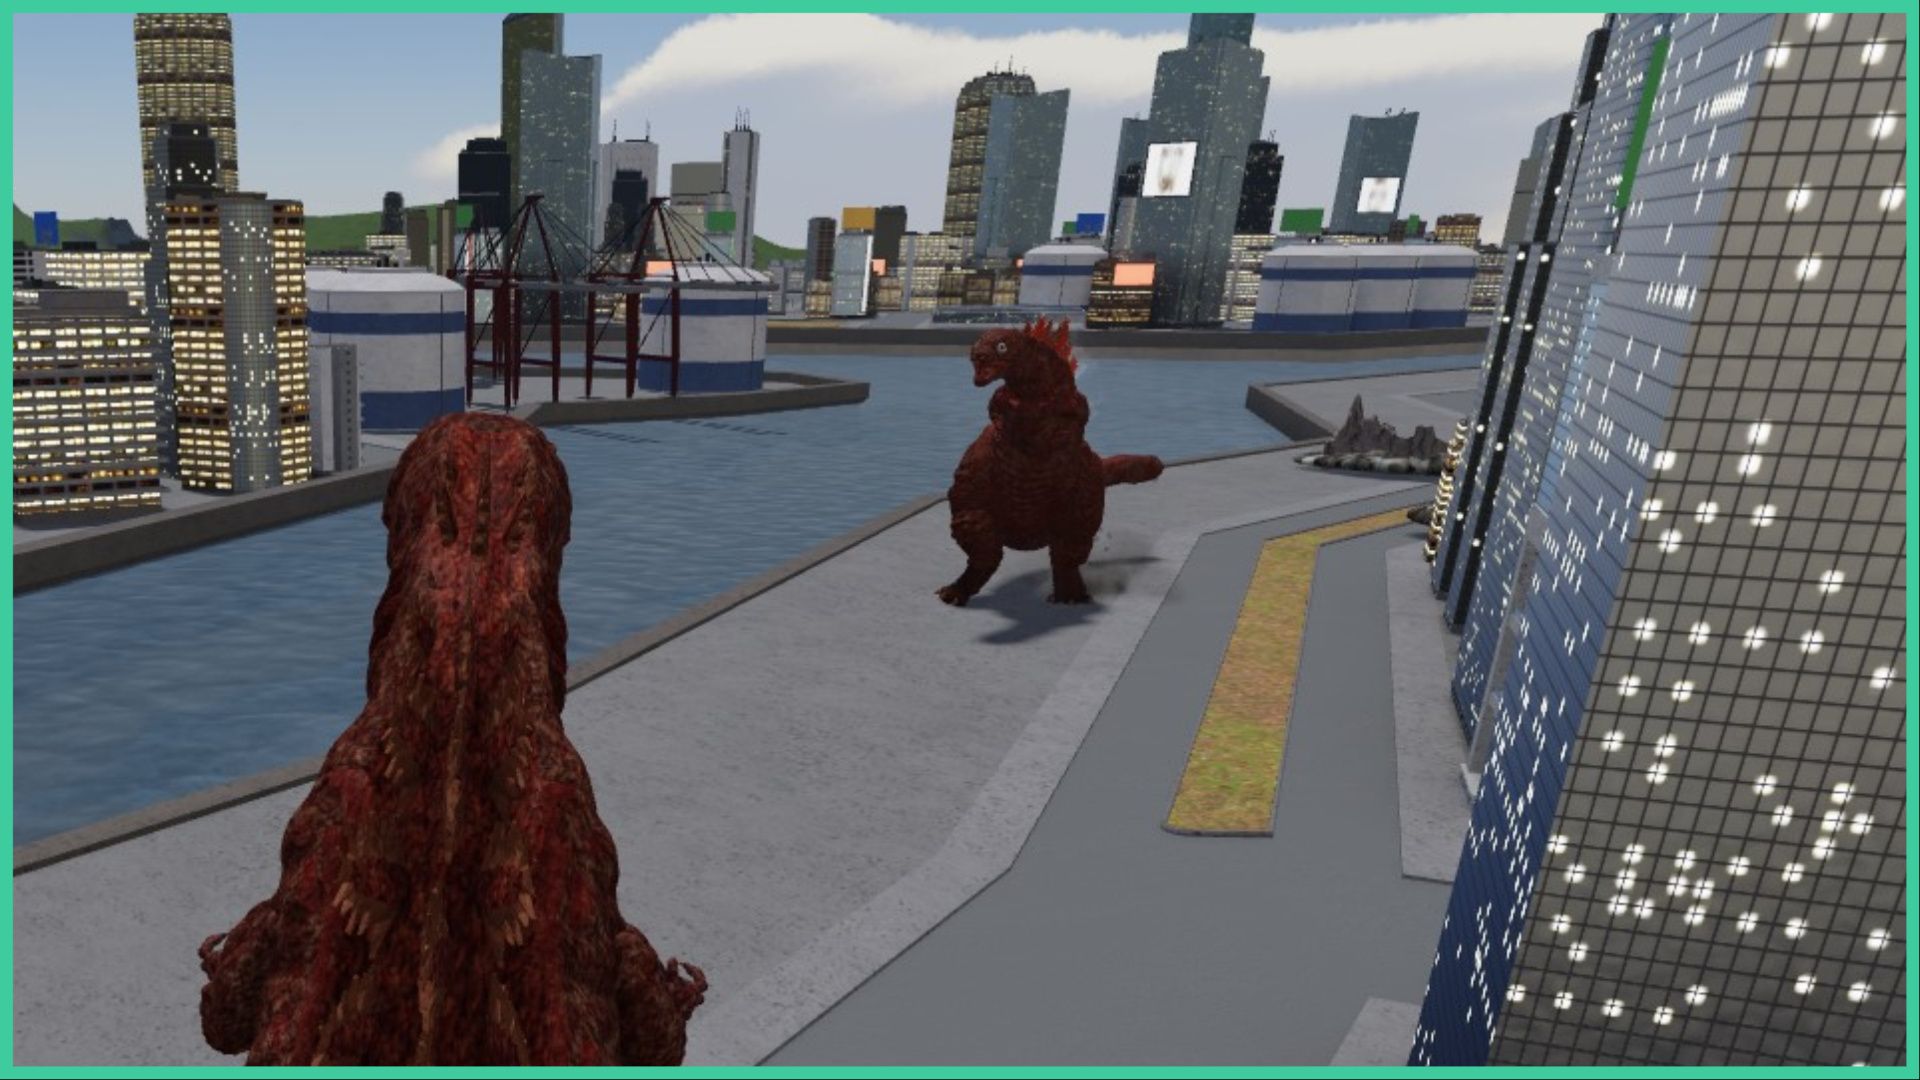 feature image for our kaiju arisen tier list, the image is a screenshot of 2 kaiju monsters walking toward each other as the opposite kaiju is roaring, the river flows to the left, as tall city buildings stand around them